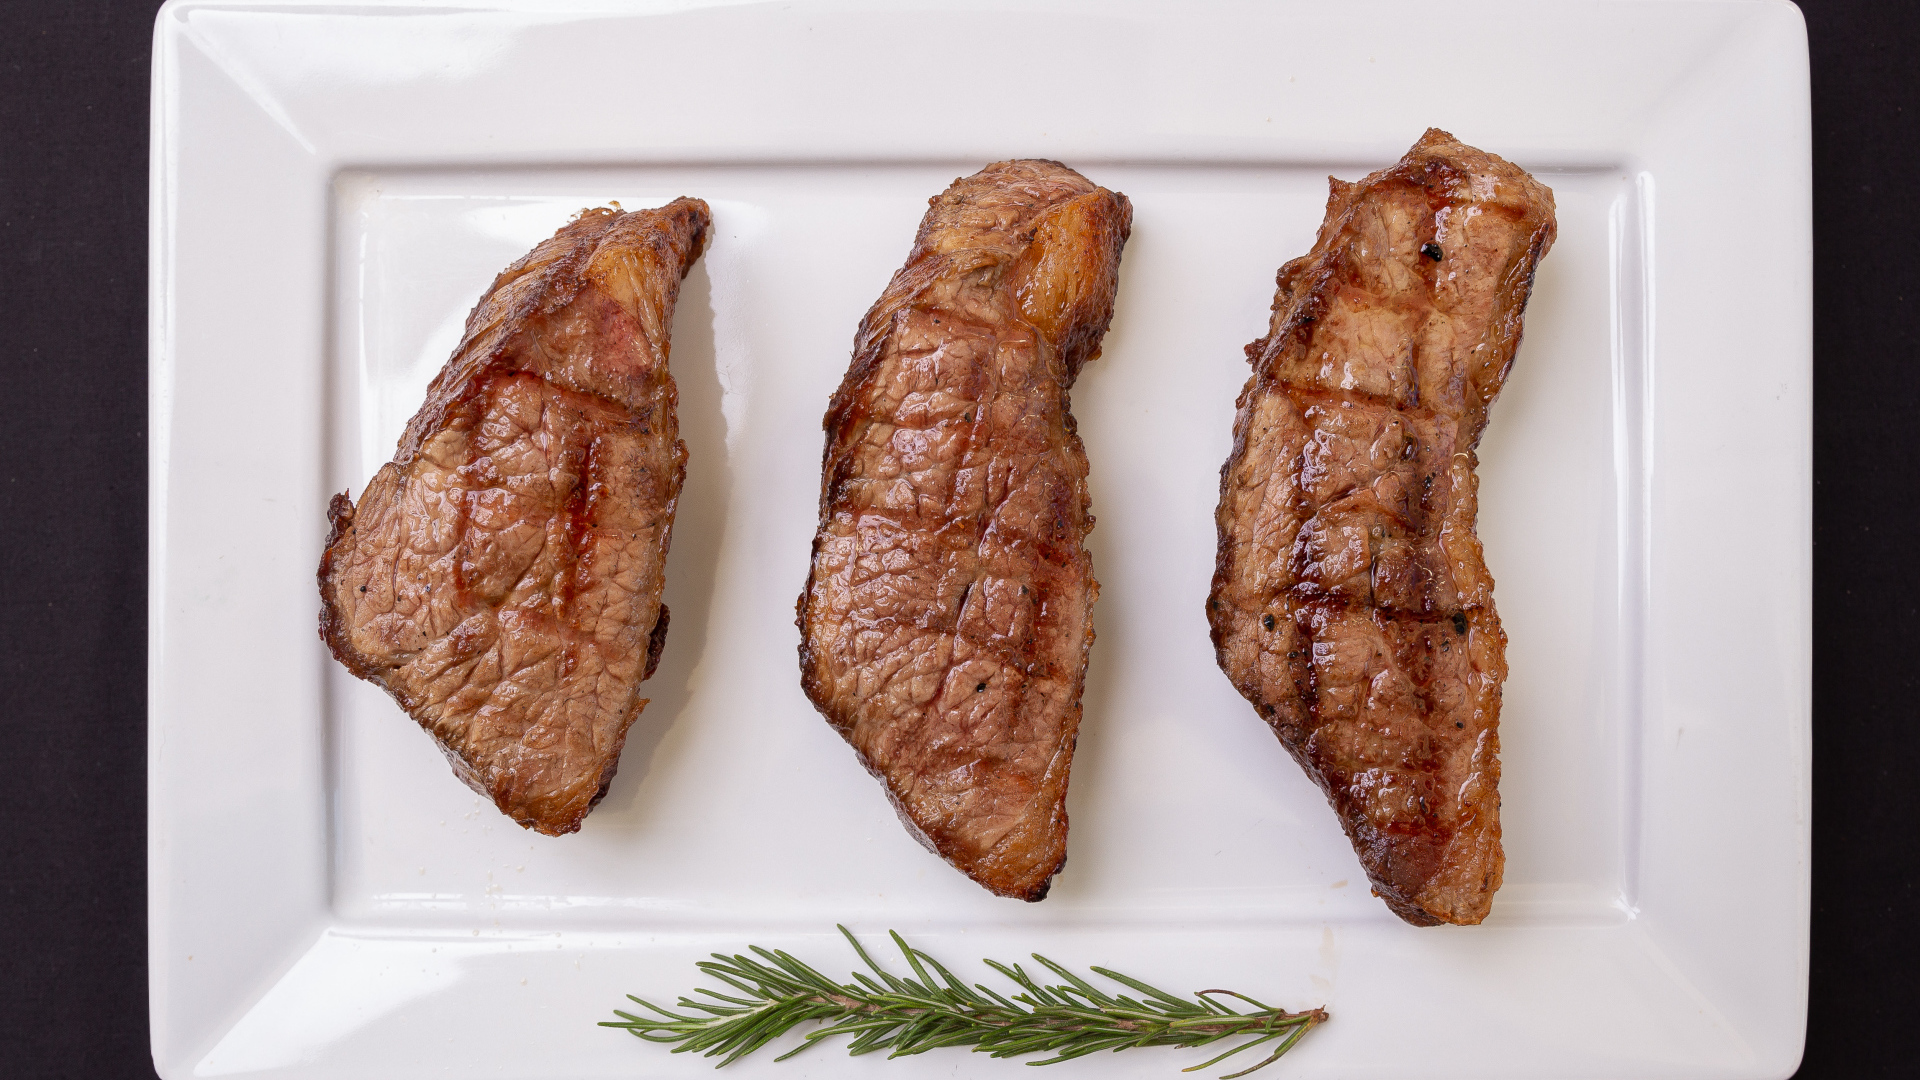 Three pieces of grilled meat on a large white plate